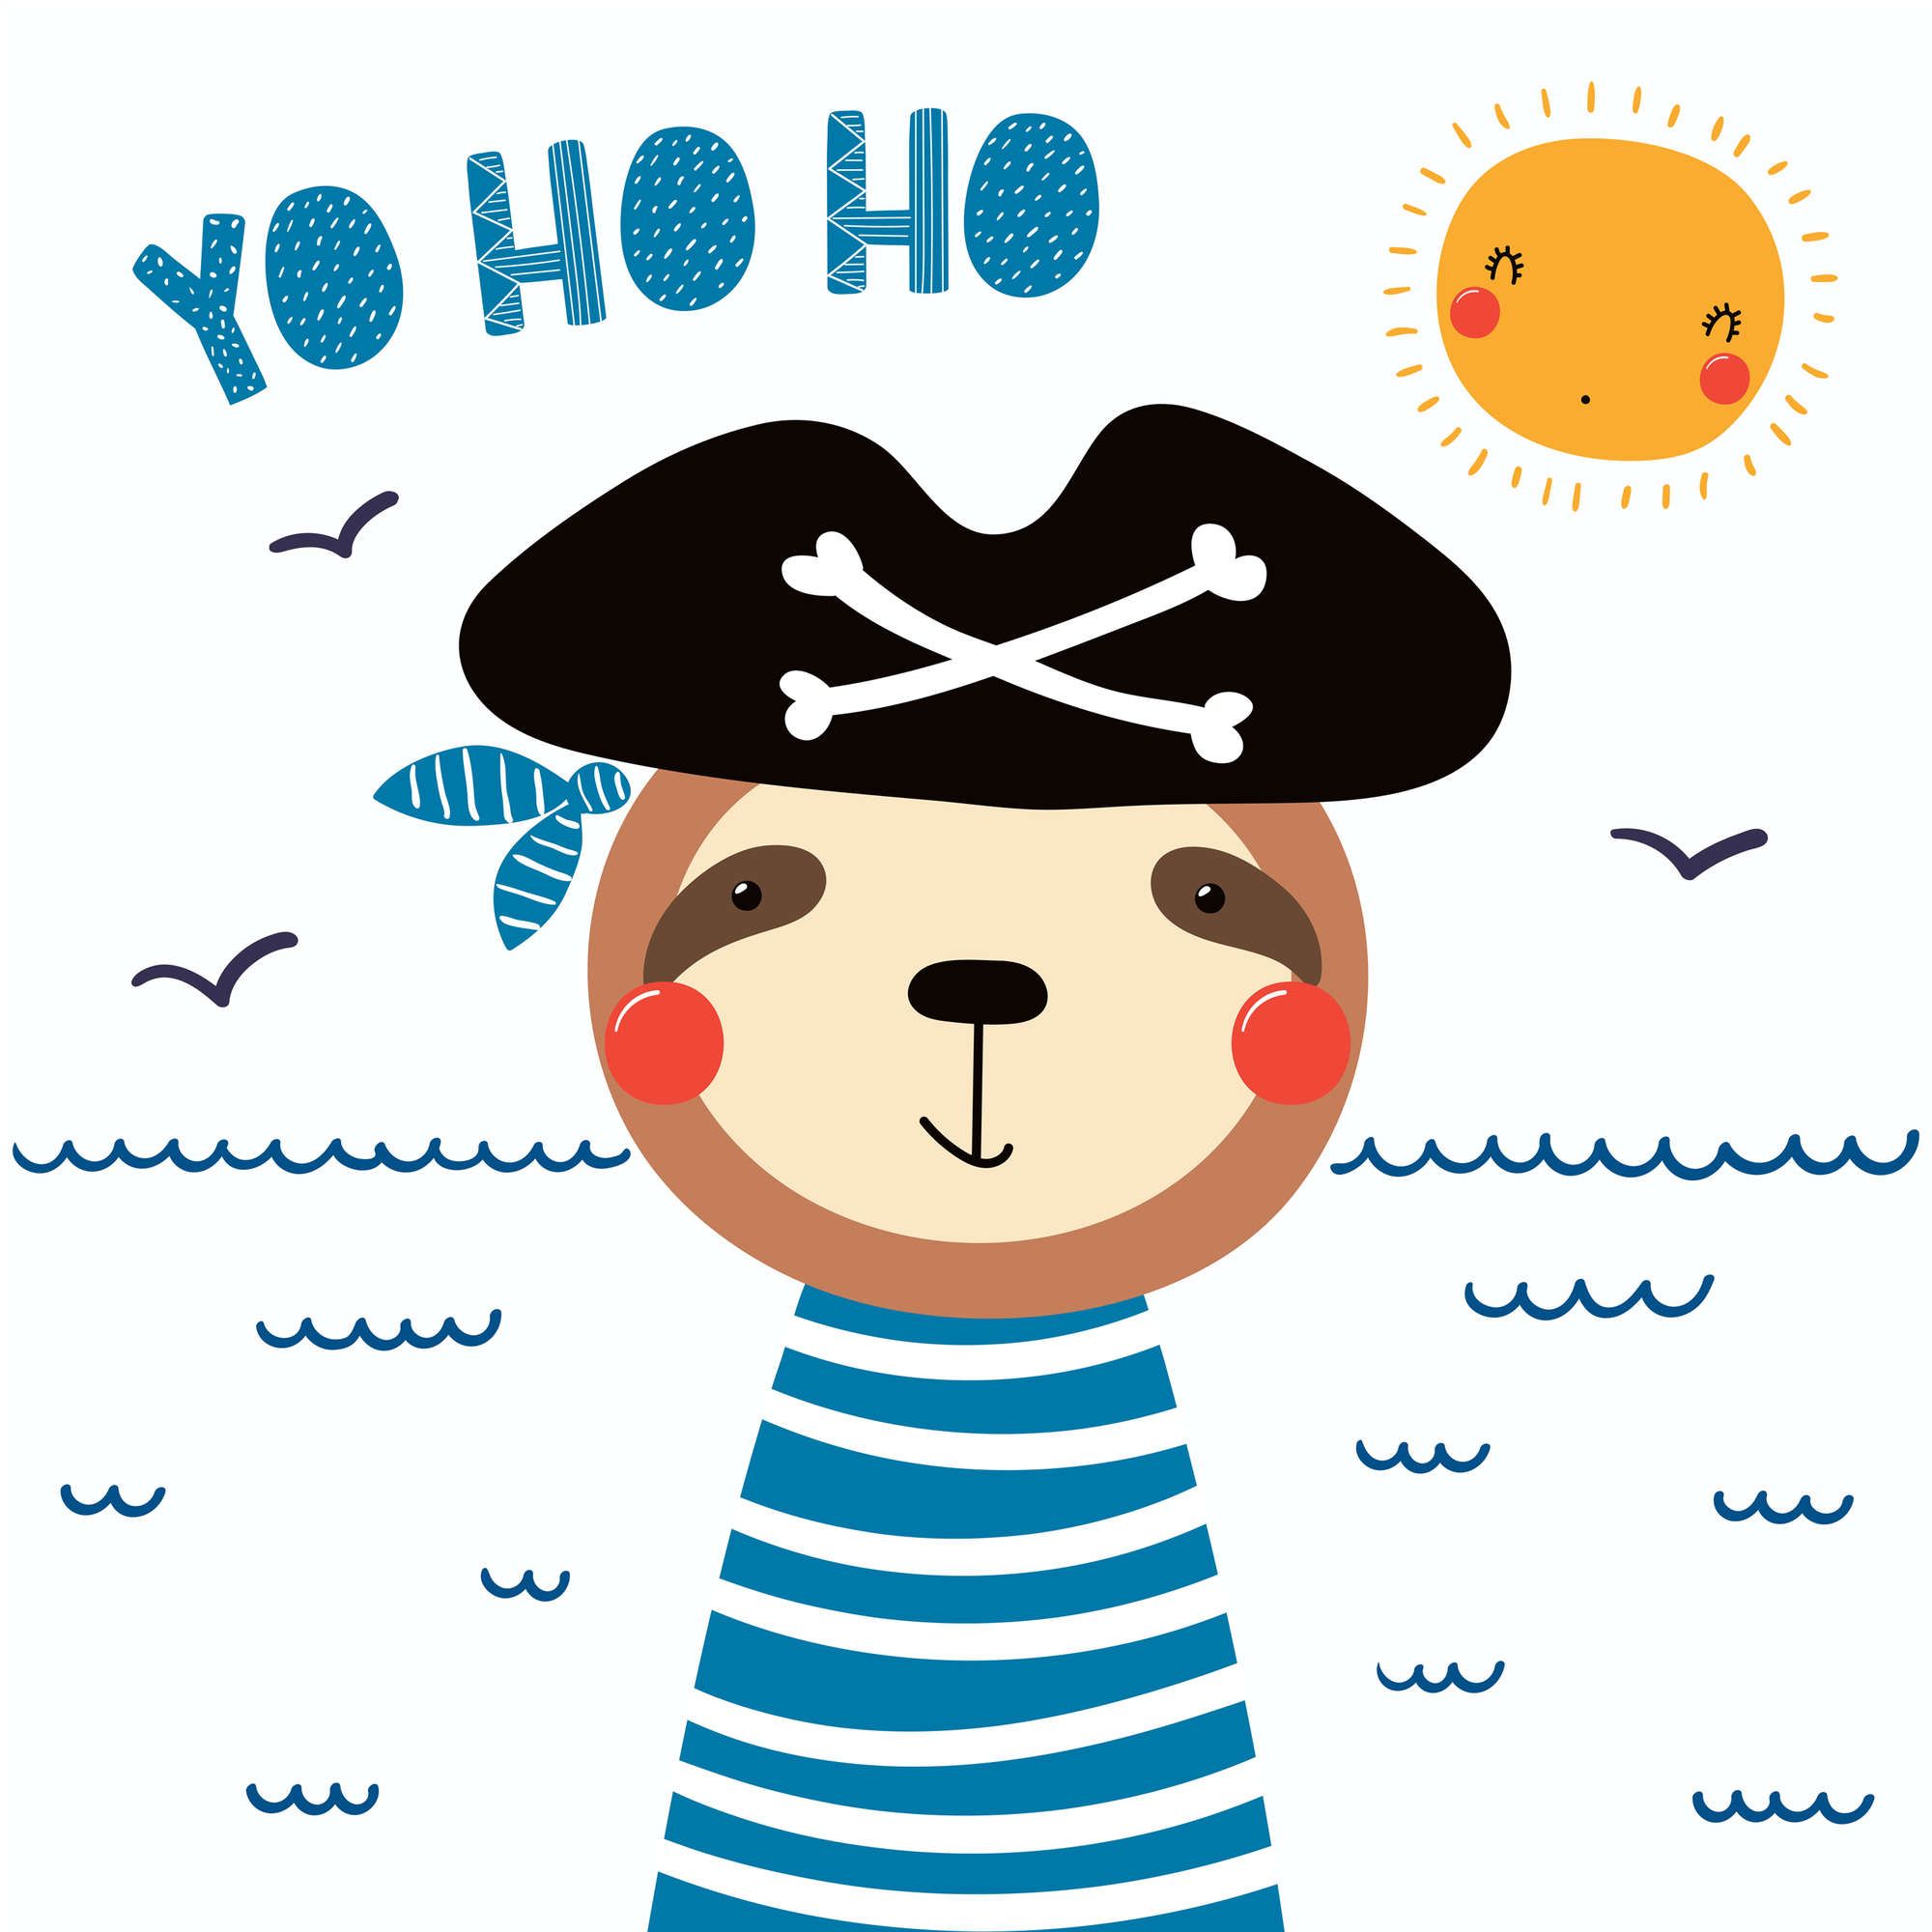             Photo wallpaper for children's room with bear pirate - Smooth & slightly shiny non-woven
        